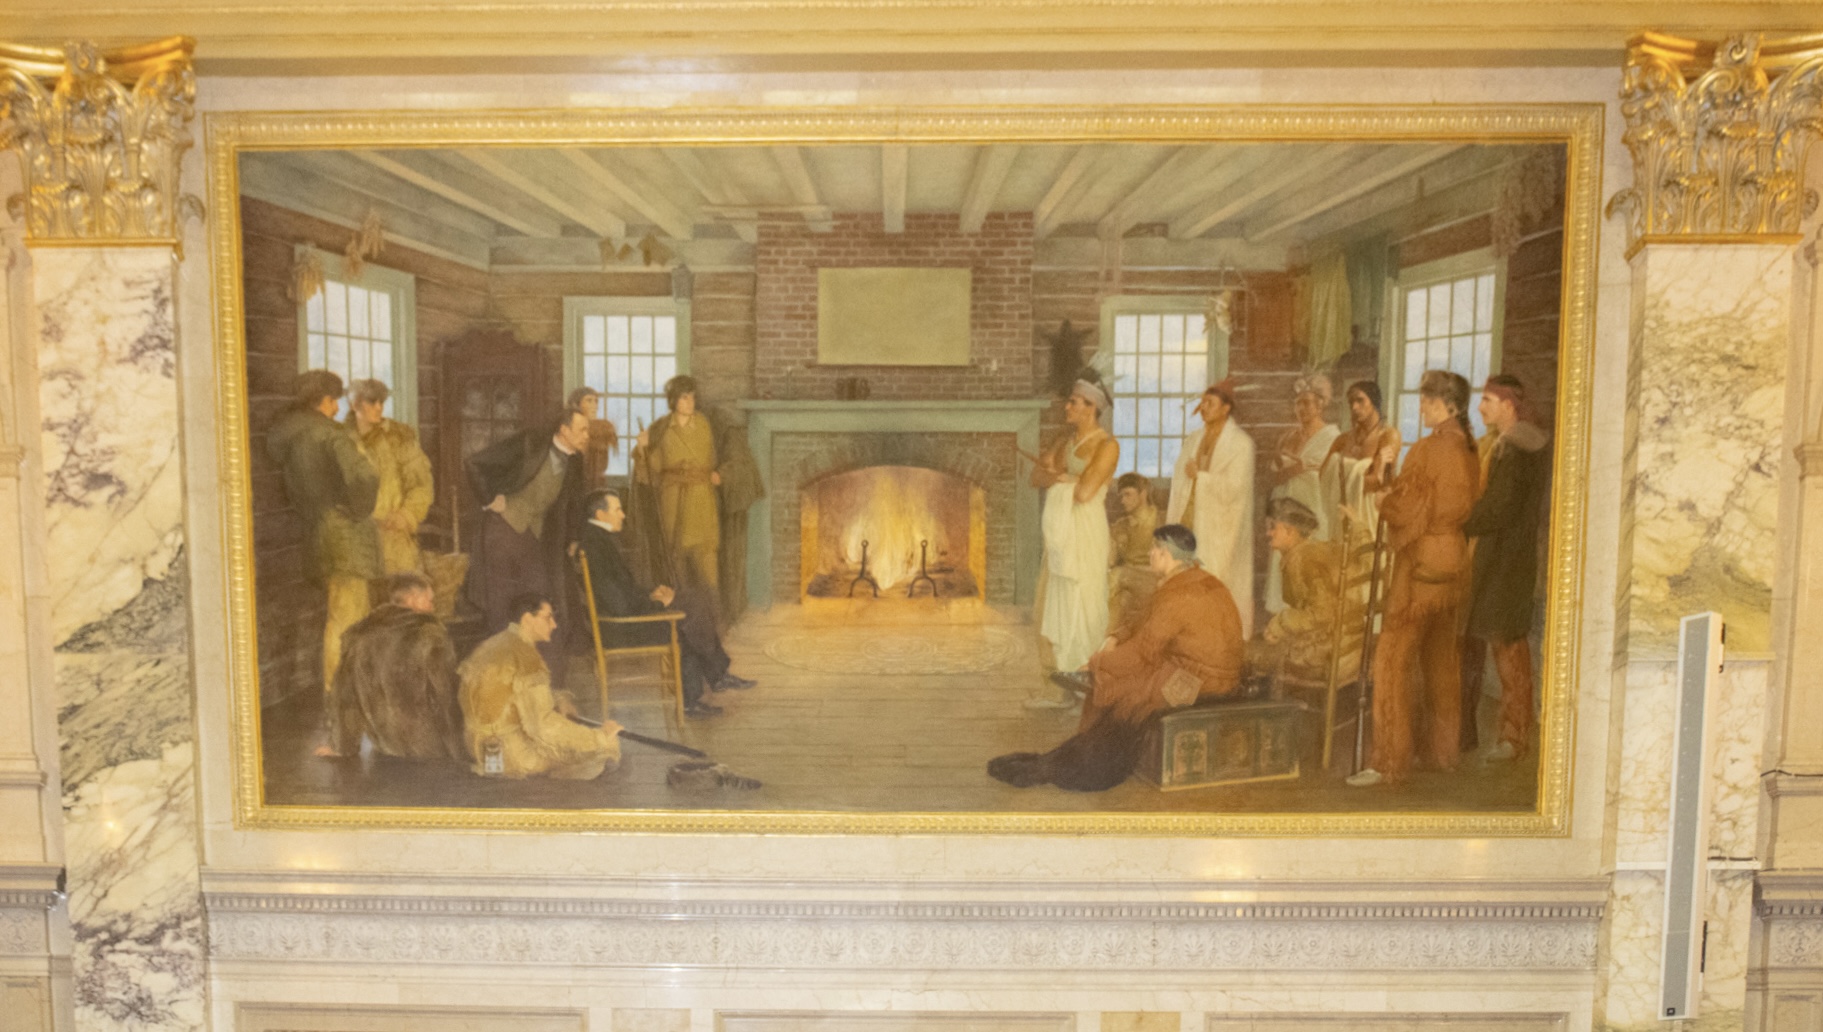 "One of four works painted by Albert Herter, this painting of the 1830 murder trial of Chief Oshkosh of the Menominees is located in the Supreme Court room in the Madison Capitol building. "One of four works painted by Albert Herter, this painting of the 1830 murder trial of Chief Oshkosh of the Menominees is located in the Supreme Court room in the Madison Capitol building. One of four works painted by Albert Herter, this painting of the 1830 murder trial of Chief Oshkosh of the Menominees is located in the Supreme Court room in the Madison Capitol building.